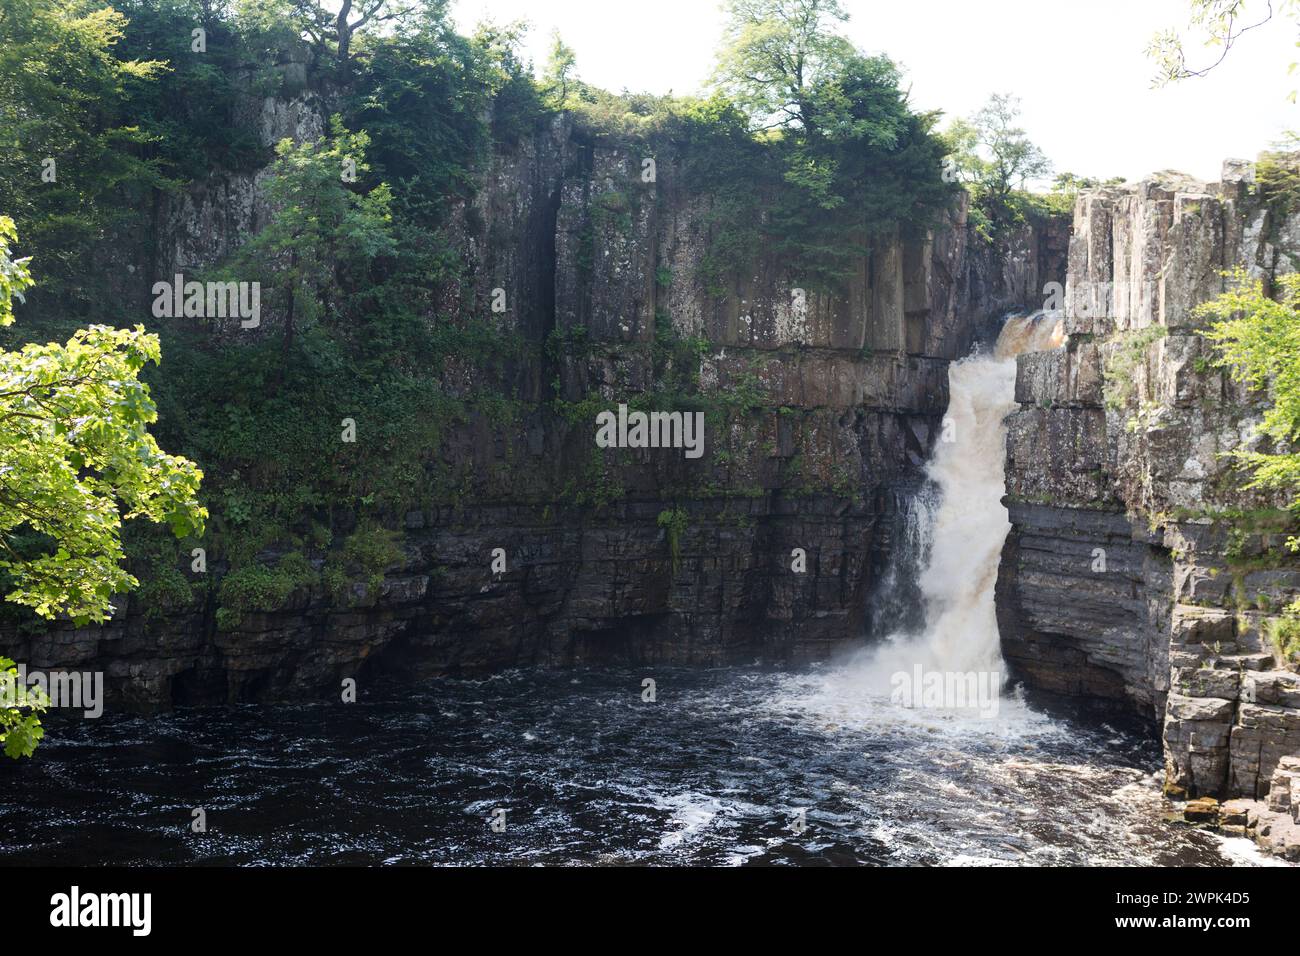 Royaume-Uni, High Force Waterfall - Middleton-in-Teesdale. Banque D'Images